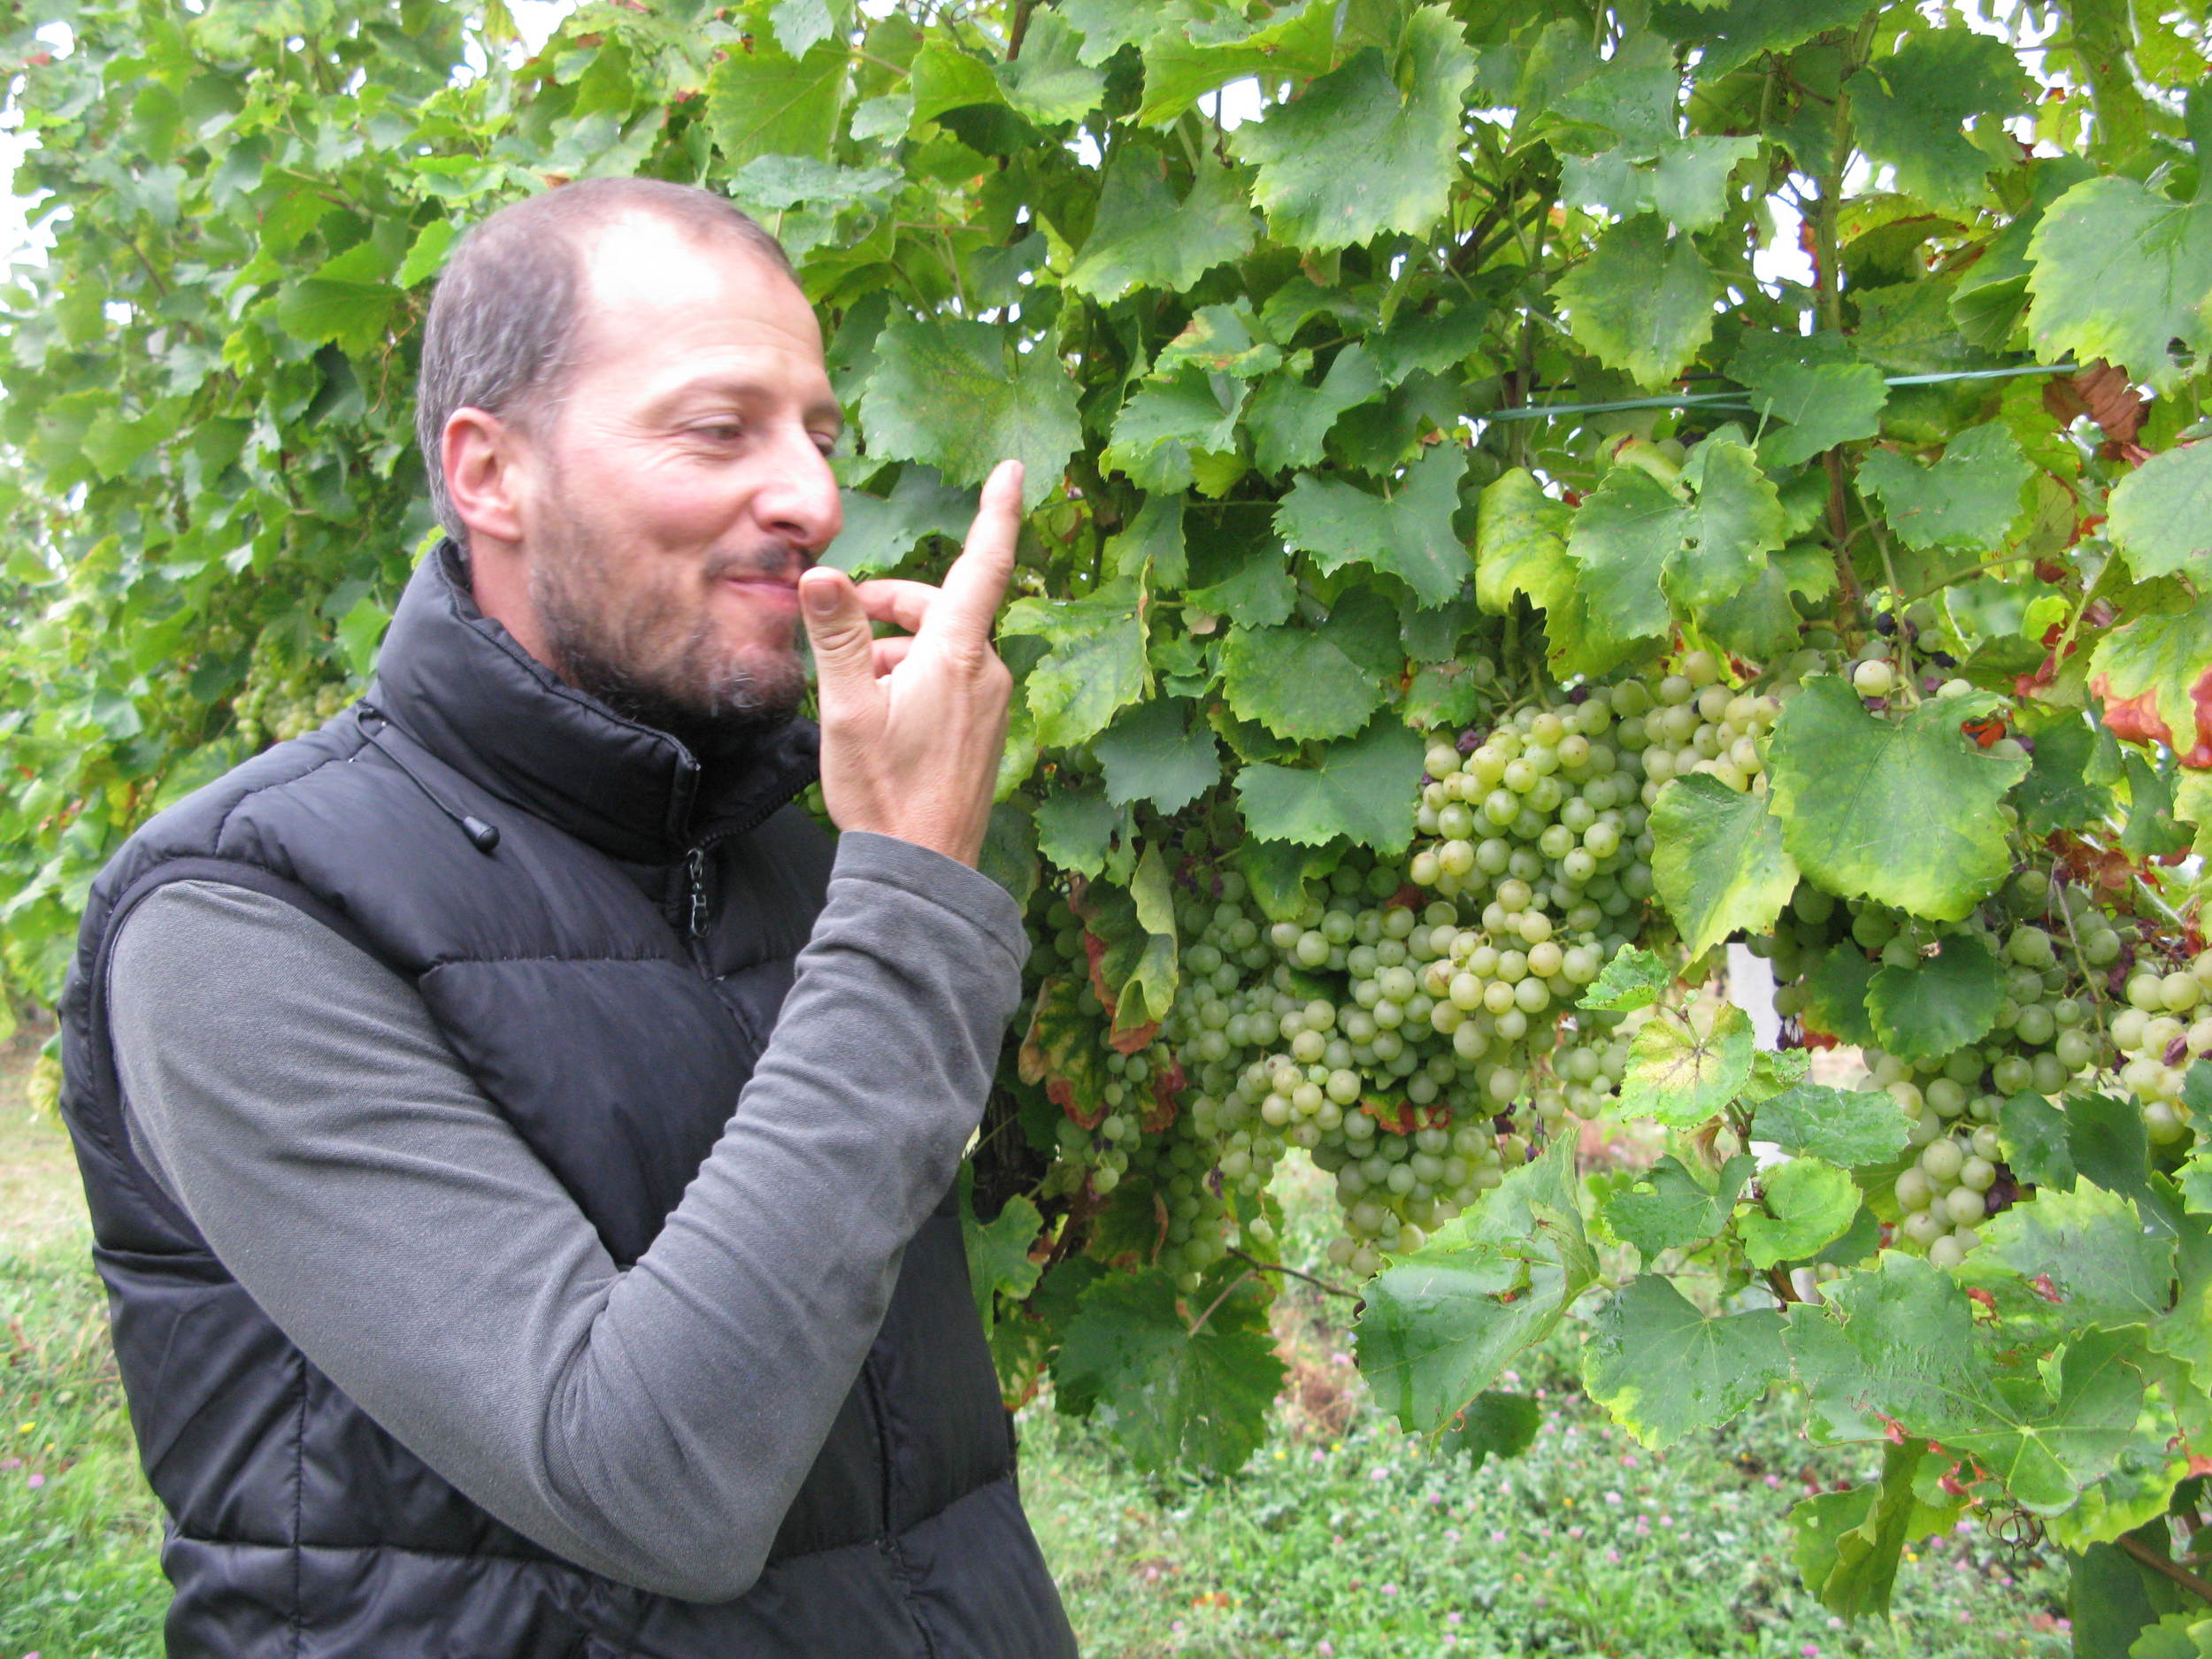 Winemaker Claudio Ancarani tastes the Famoso grapes he is helping to save